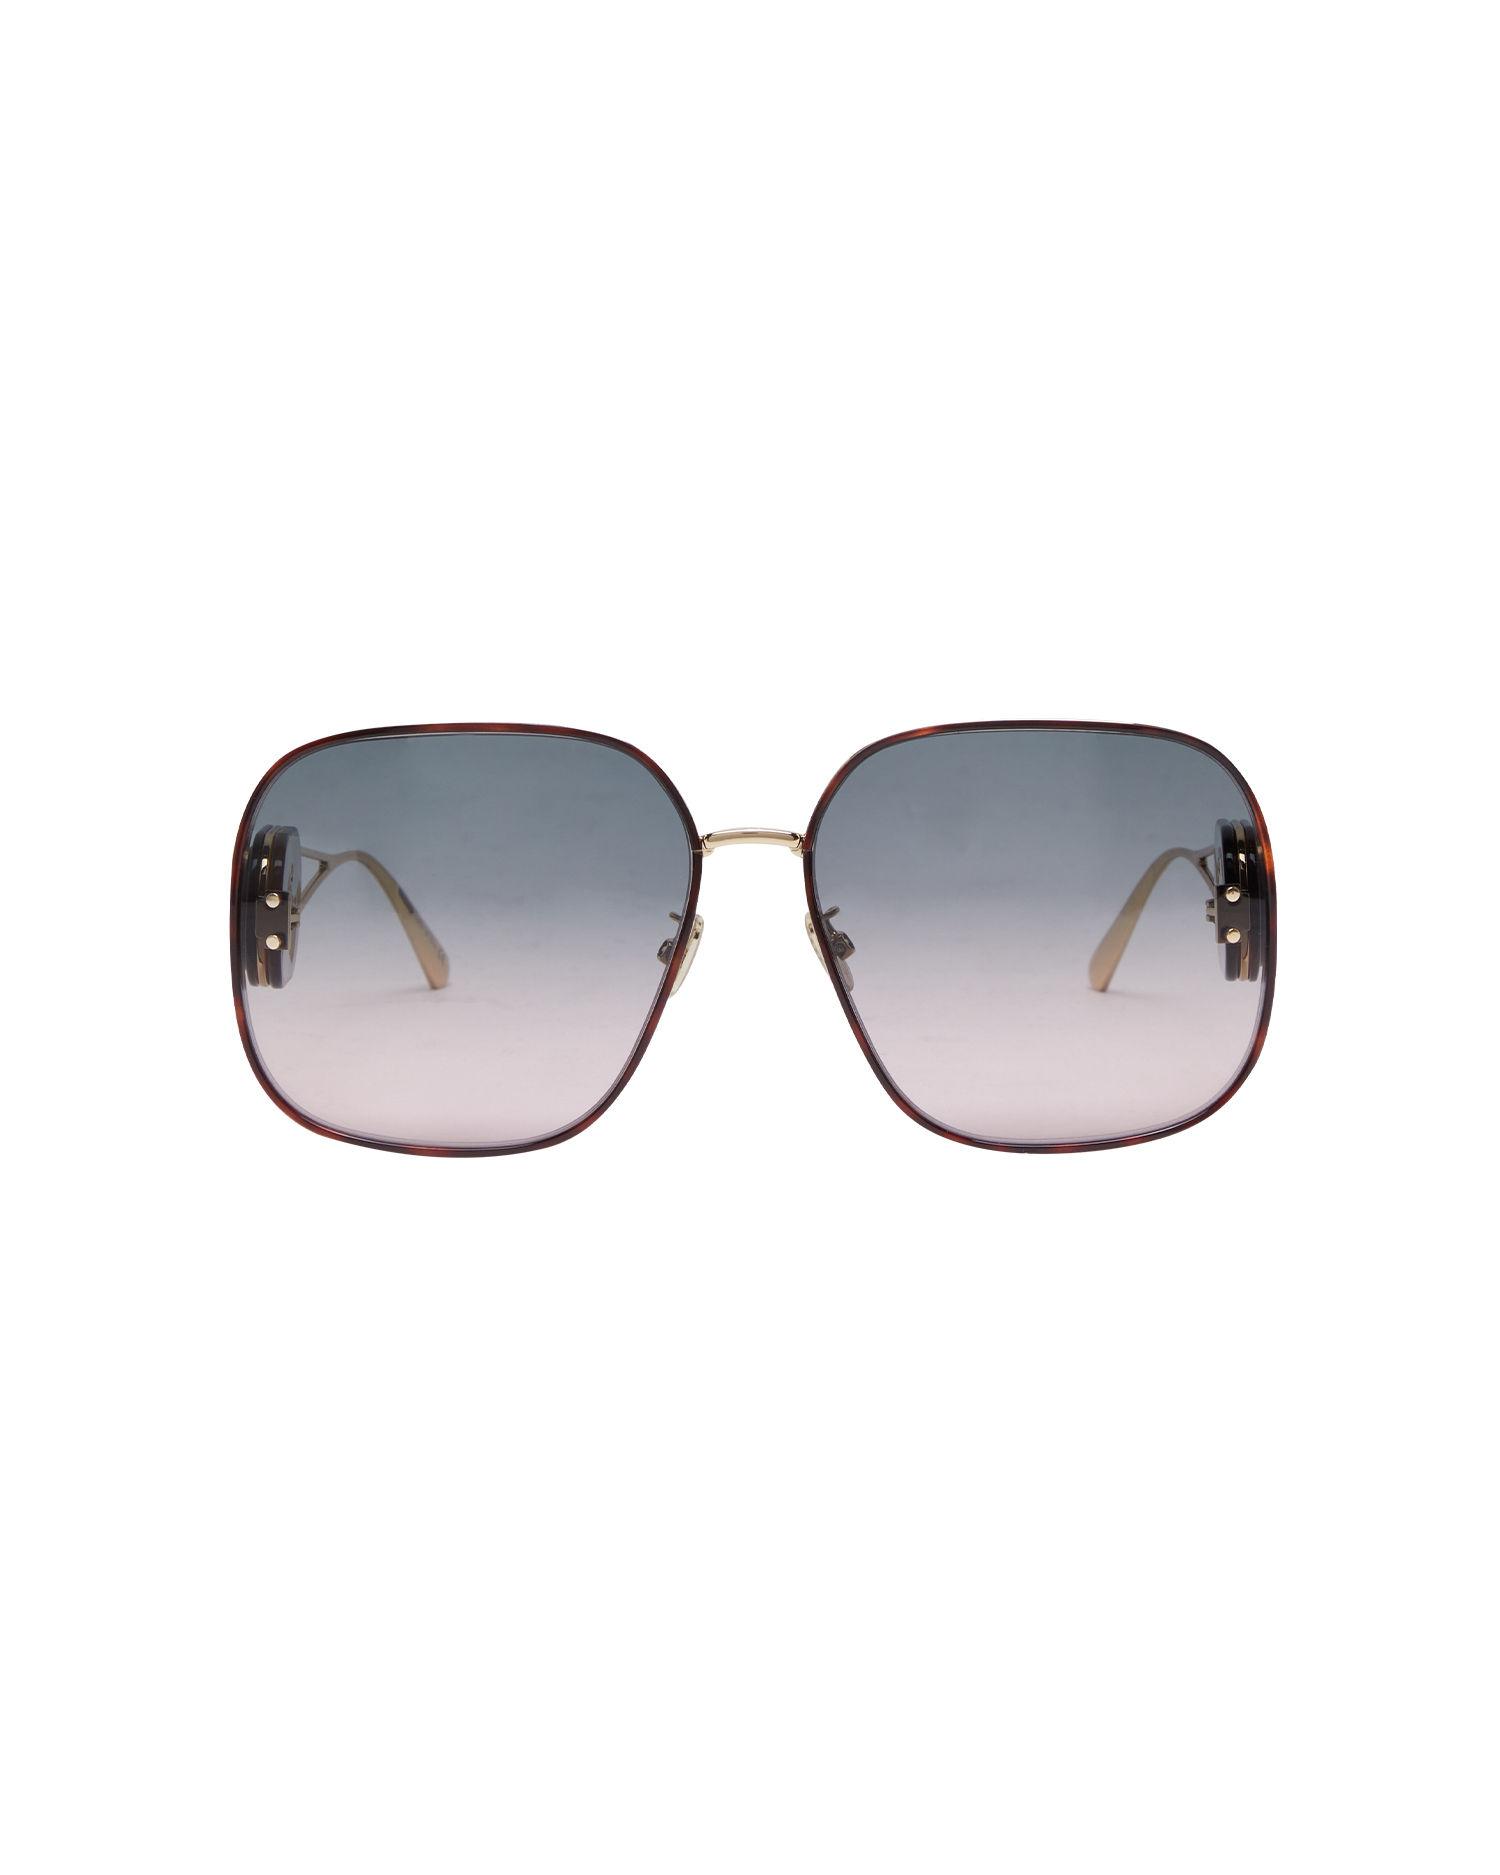 DiorBobby sunglasses by CHRISTIAN DIOR